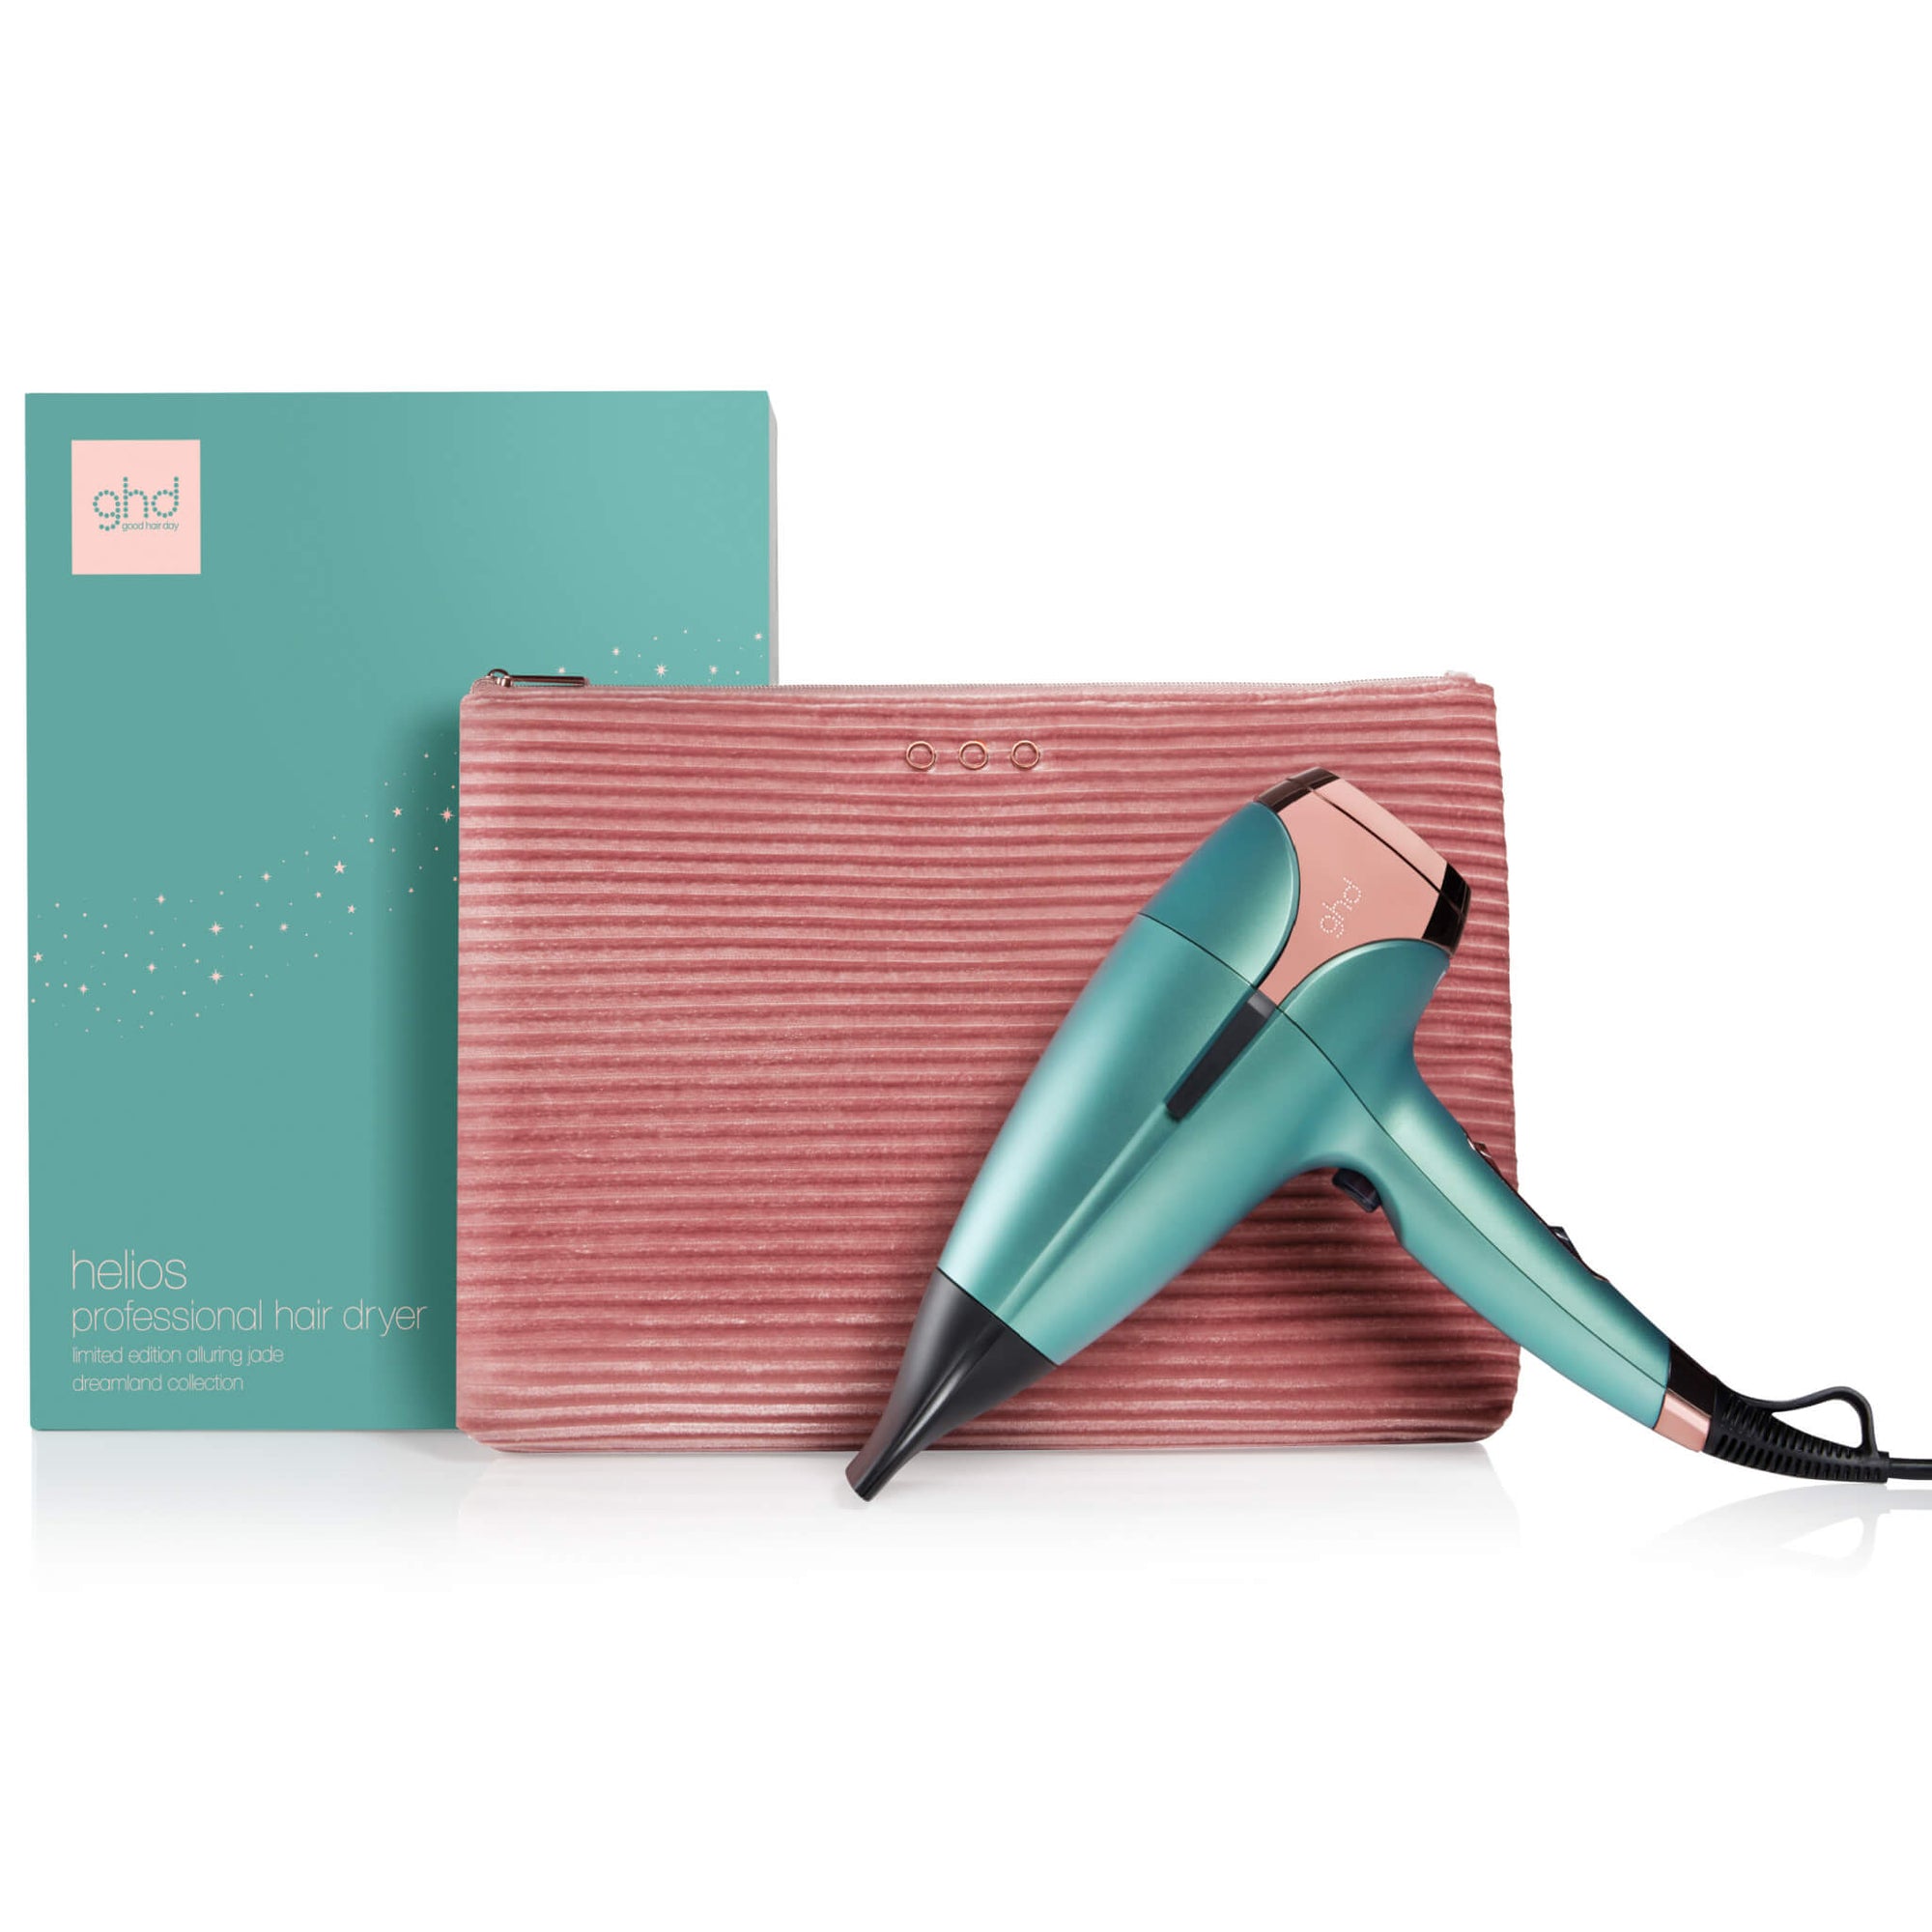 ghd Limited Edition Collections